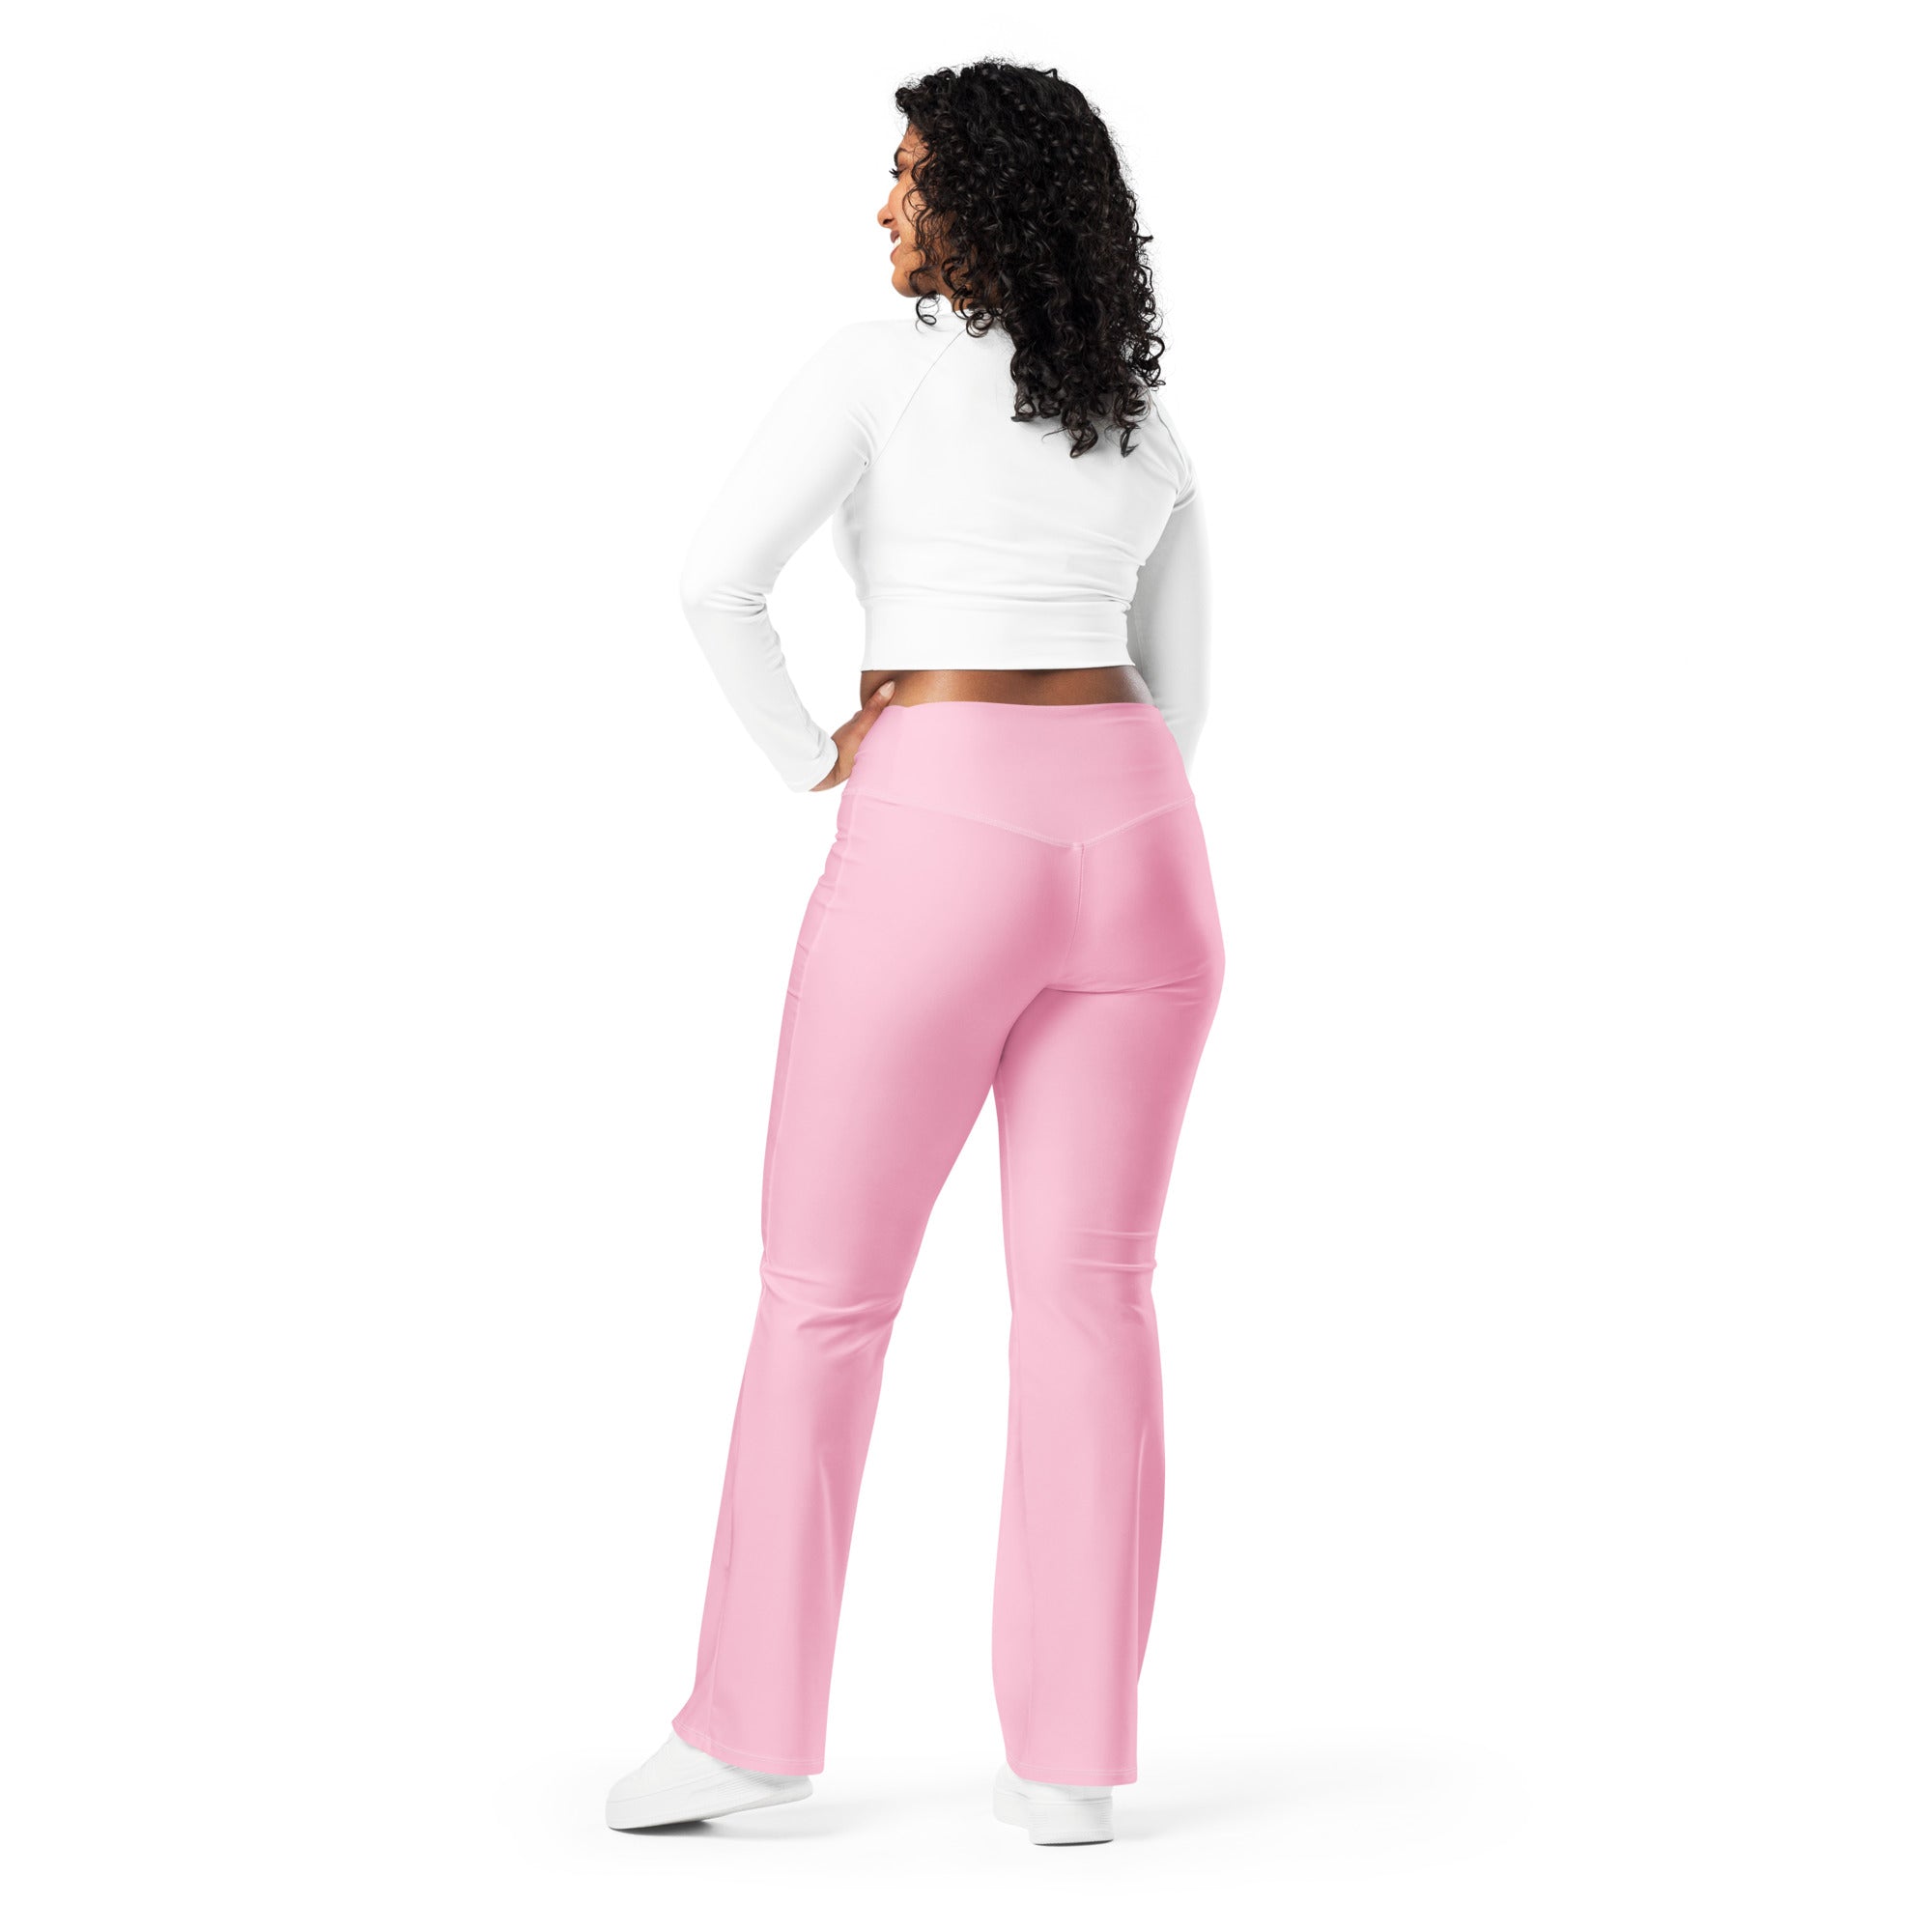 Flare leggings- Cotton Candy